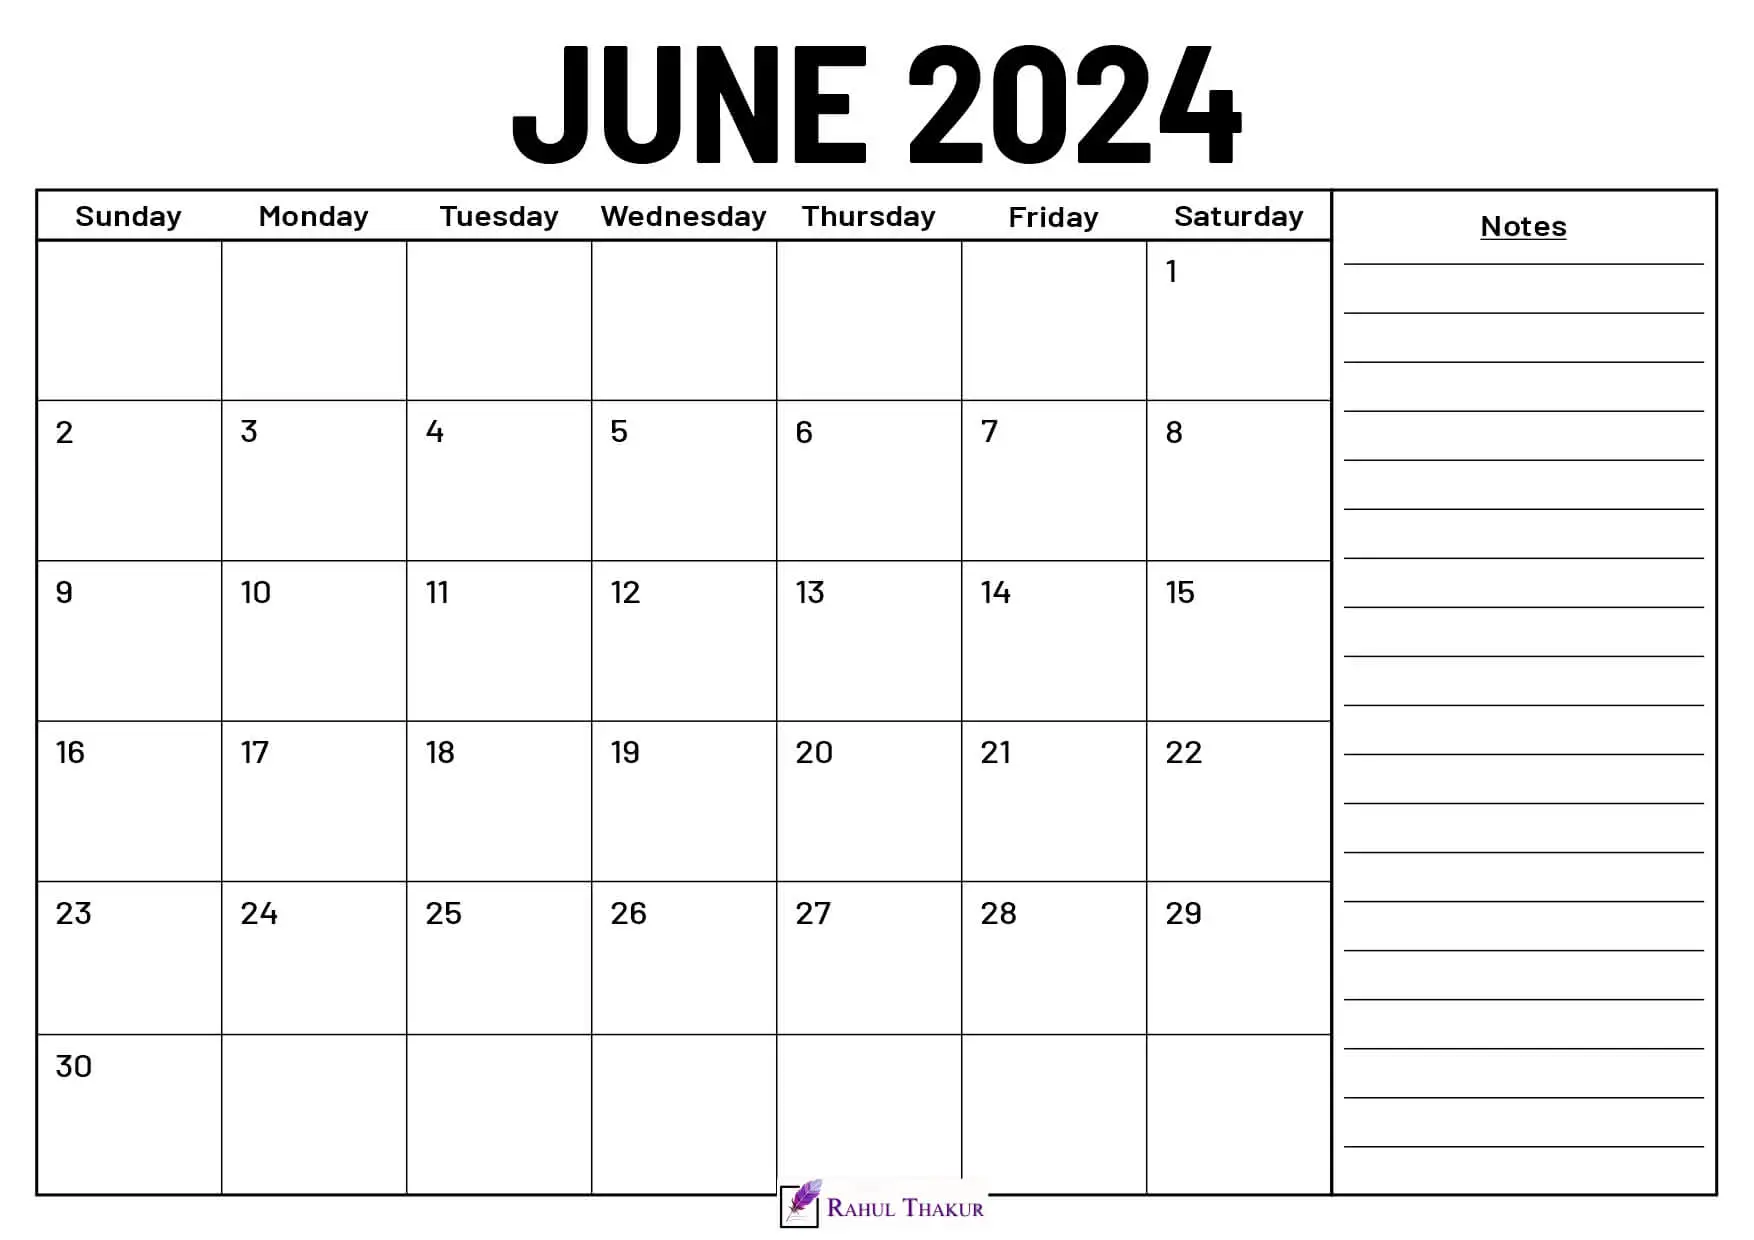 June 2024 Calendar With Notes